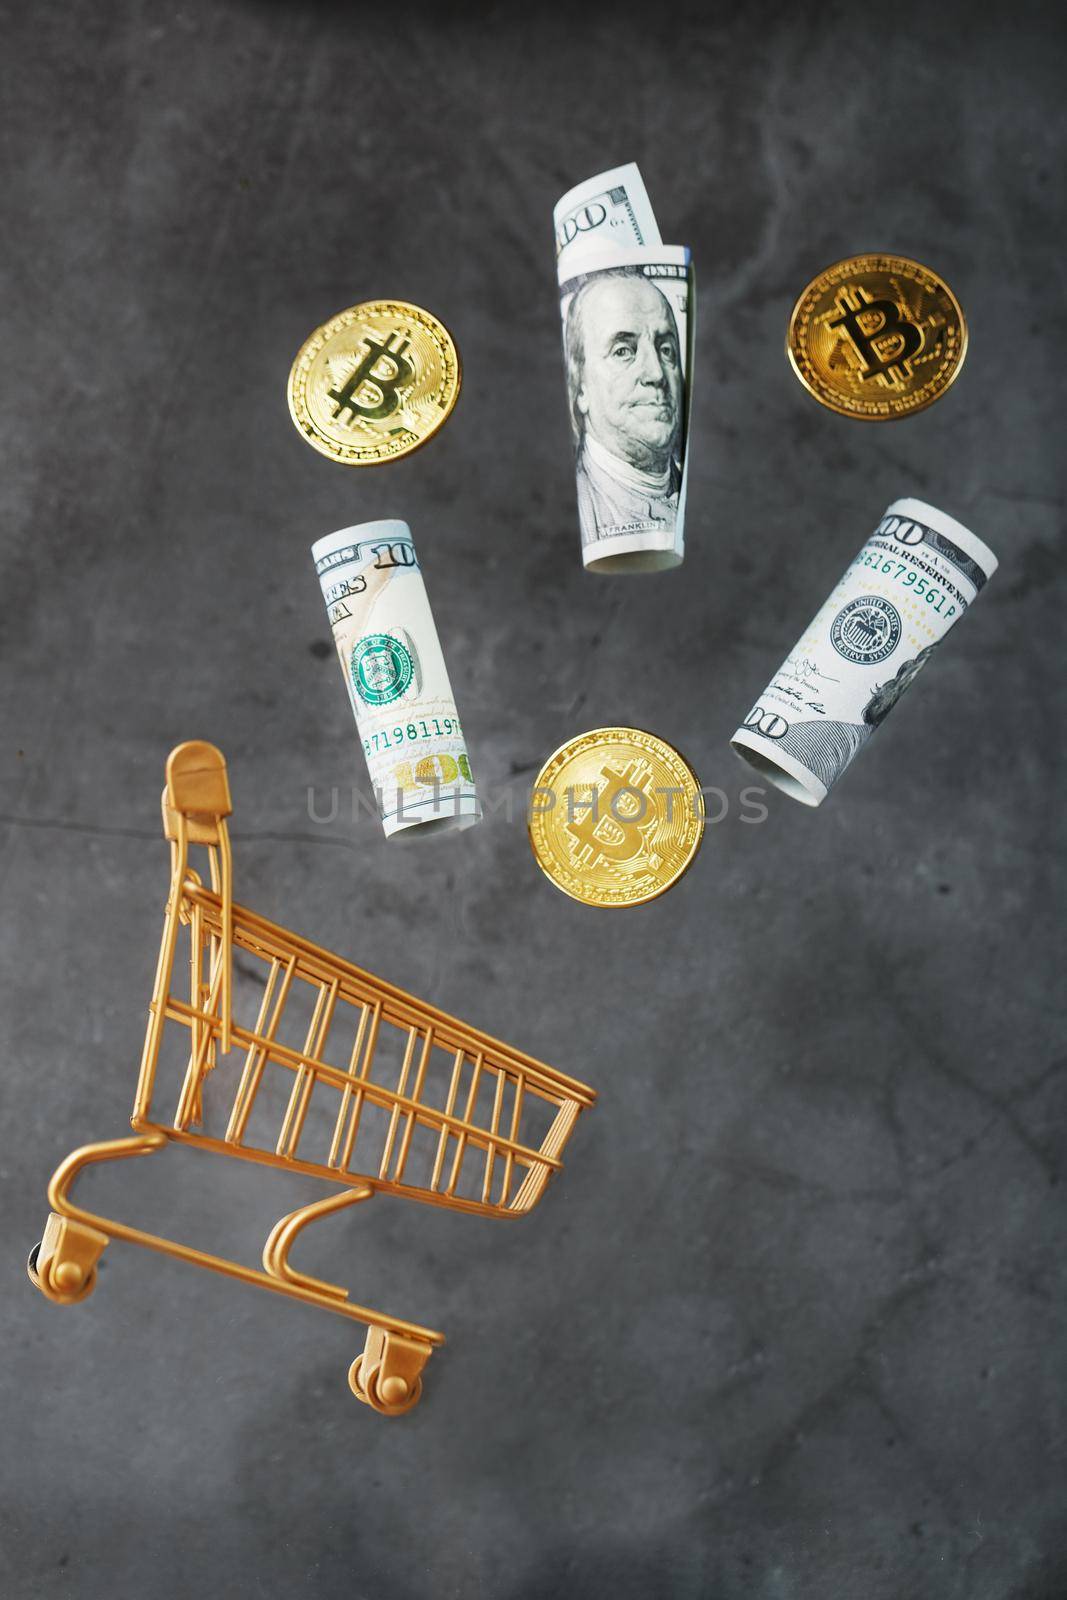 Gold mini cart with bitcoin coins and US dollars in a flight of levitation on a dark background. A shopping concept for cryptocurrency businesses, finance, trading, or stock exchange investments